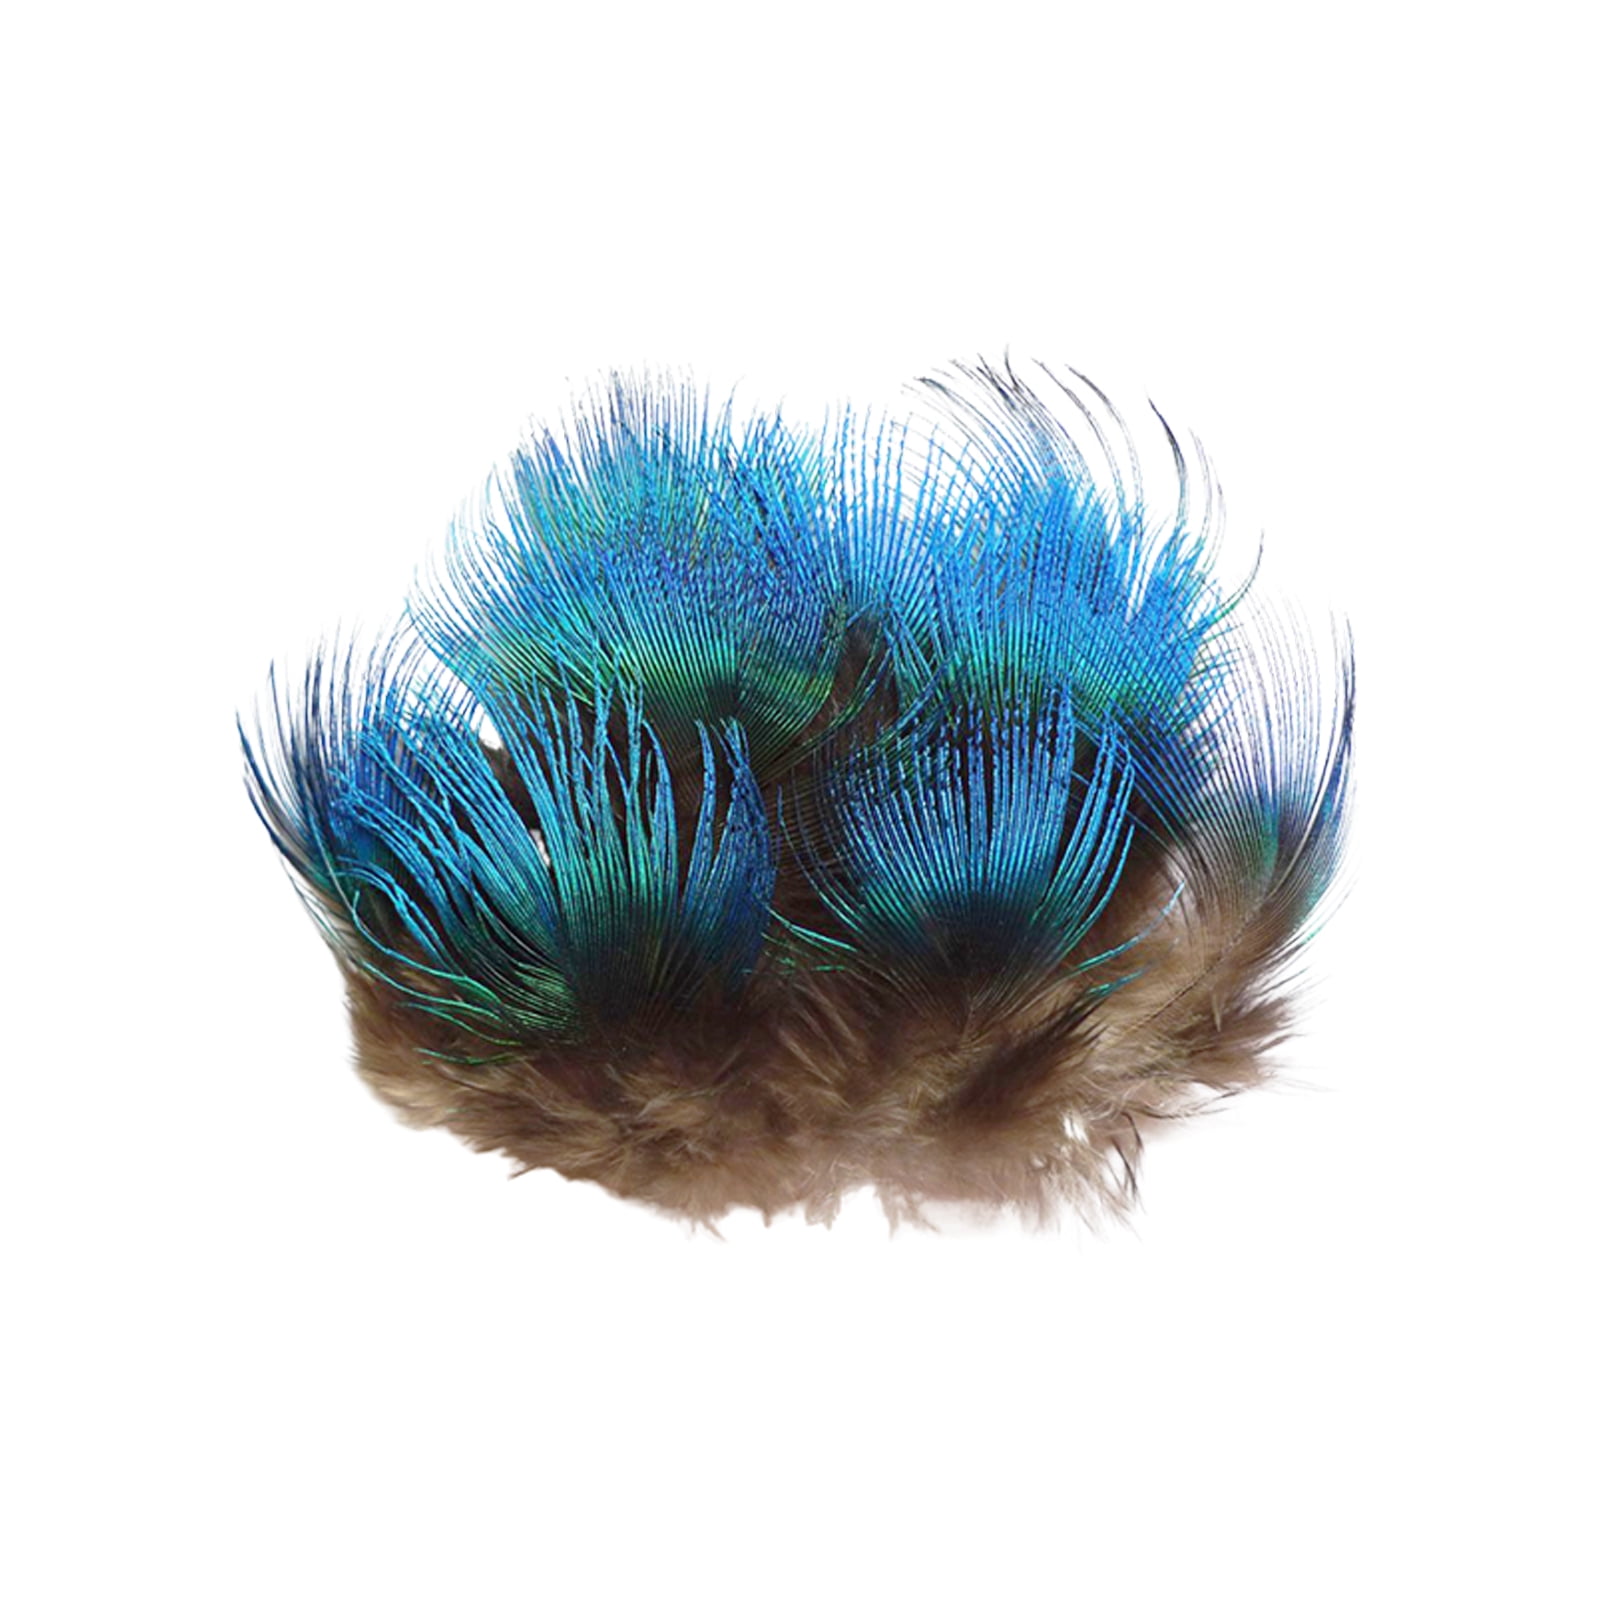 20Pcs/Lot Natural Peacock Feathers for Crafts Table Centerpieces Peacocks  Sword Decorative Feather DIY Handicraft Accessories